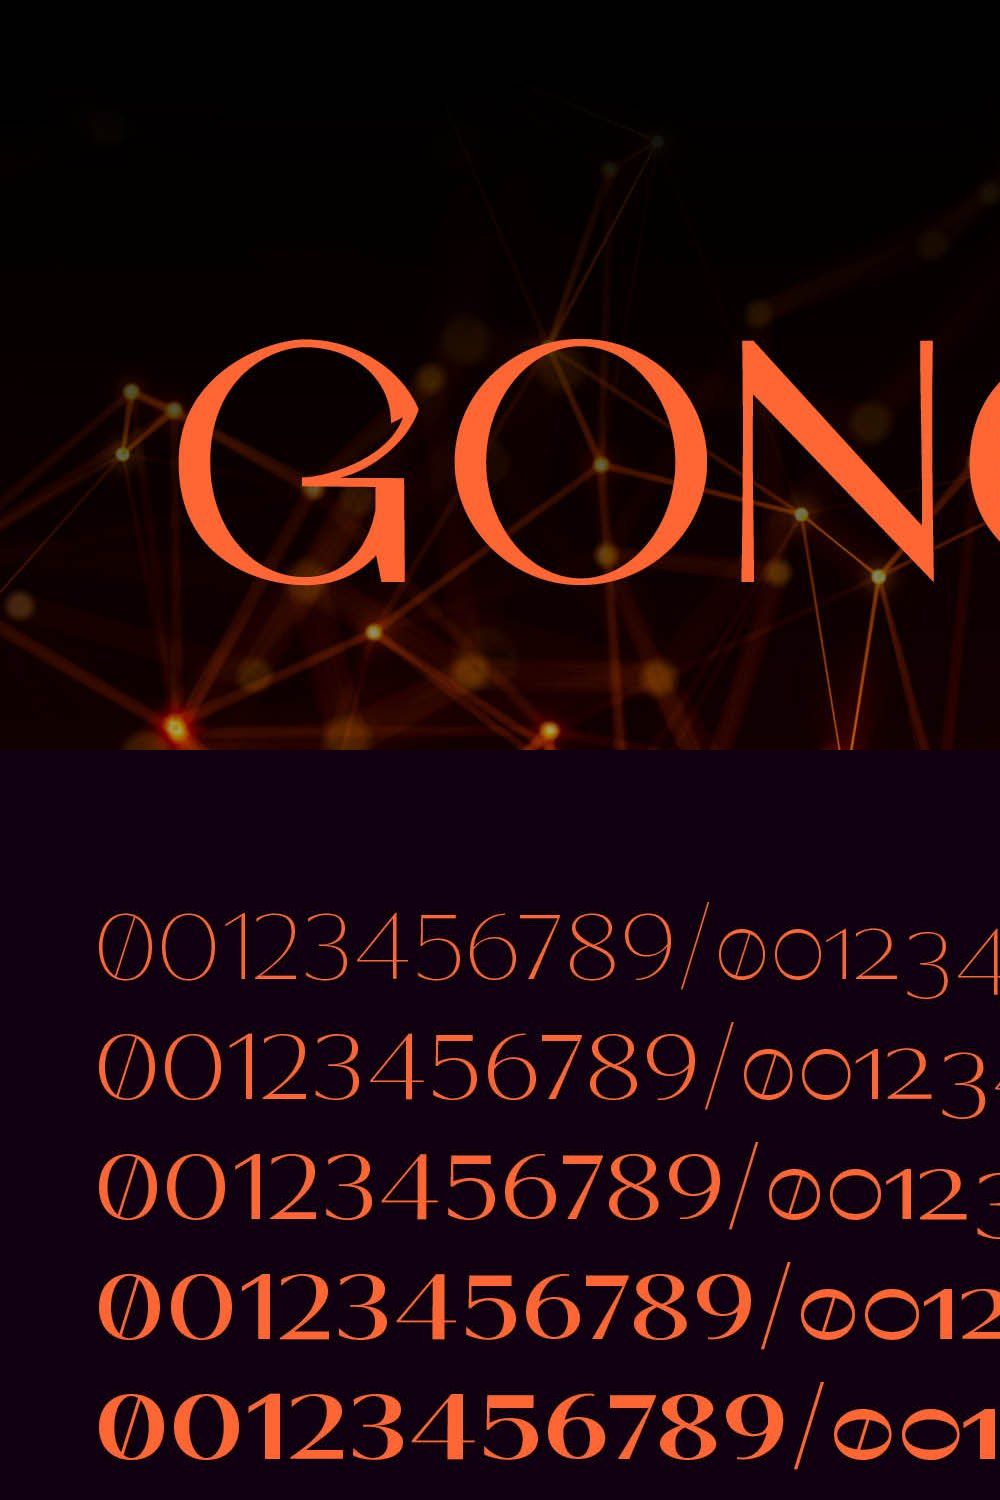 Goncol pinterest preview image.